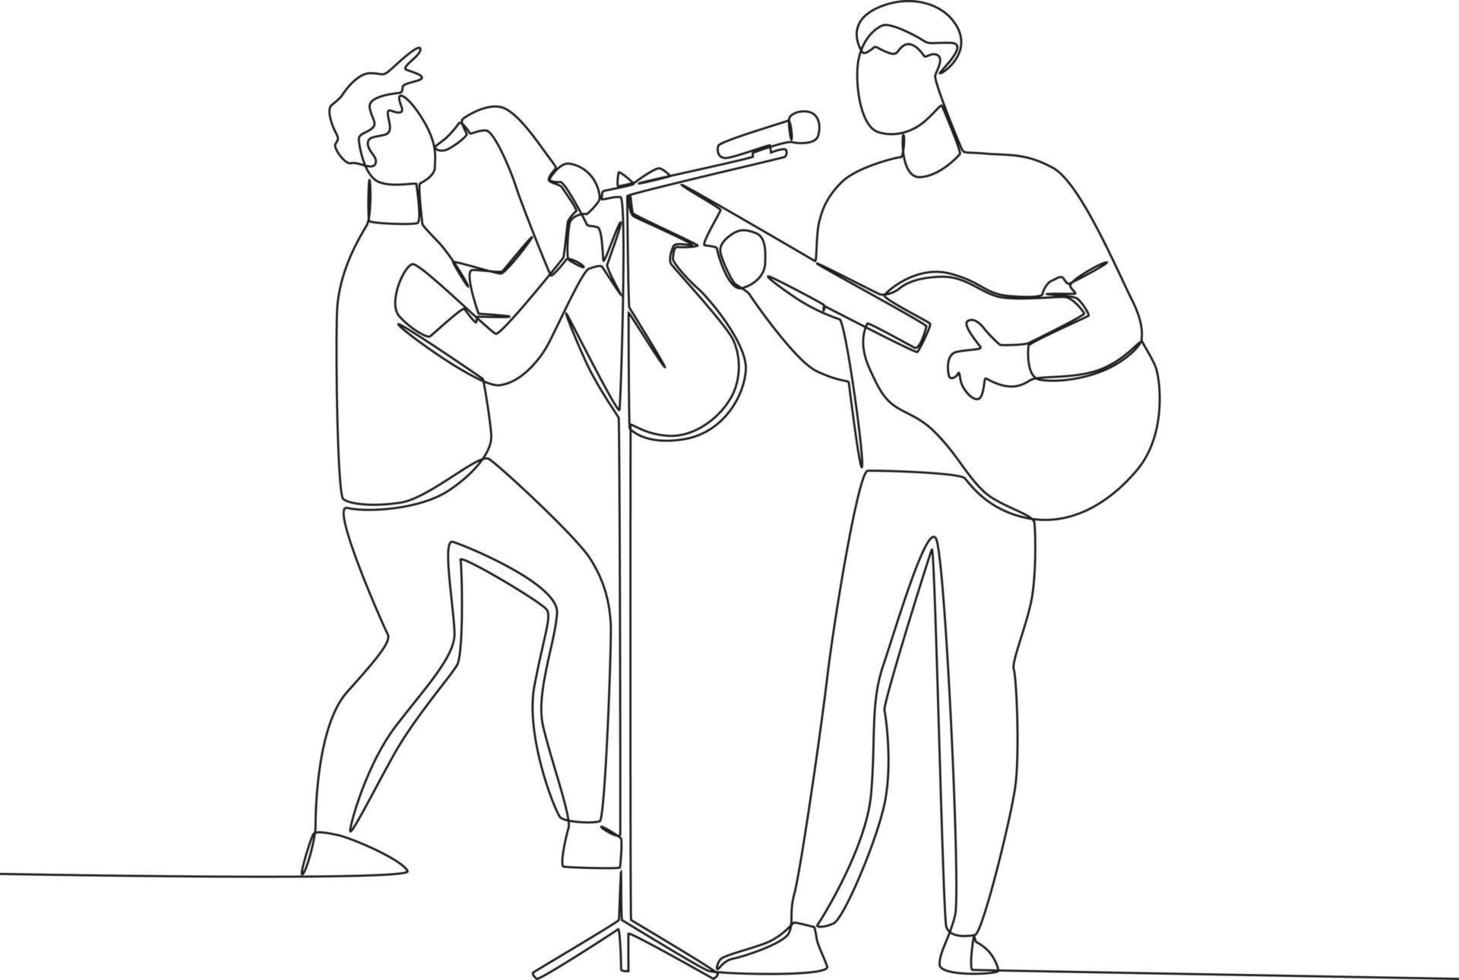 A man and his friend playing guitar and saxophone on stage vector